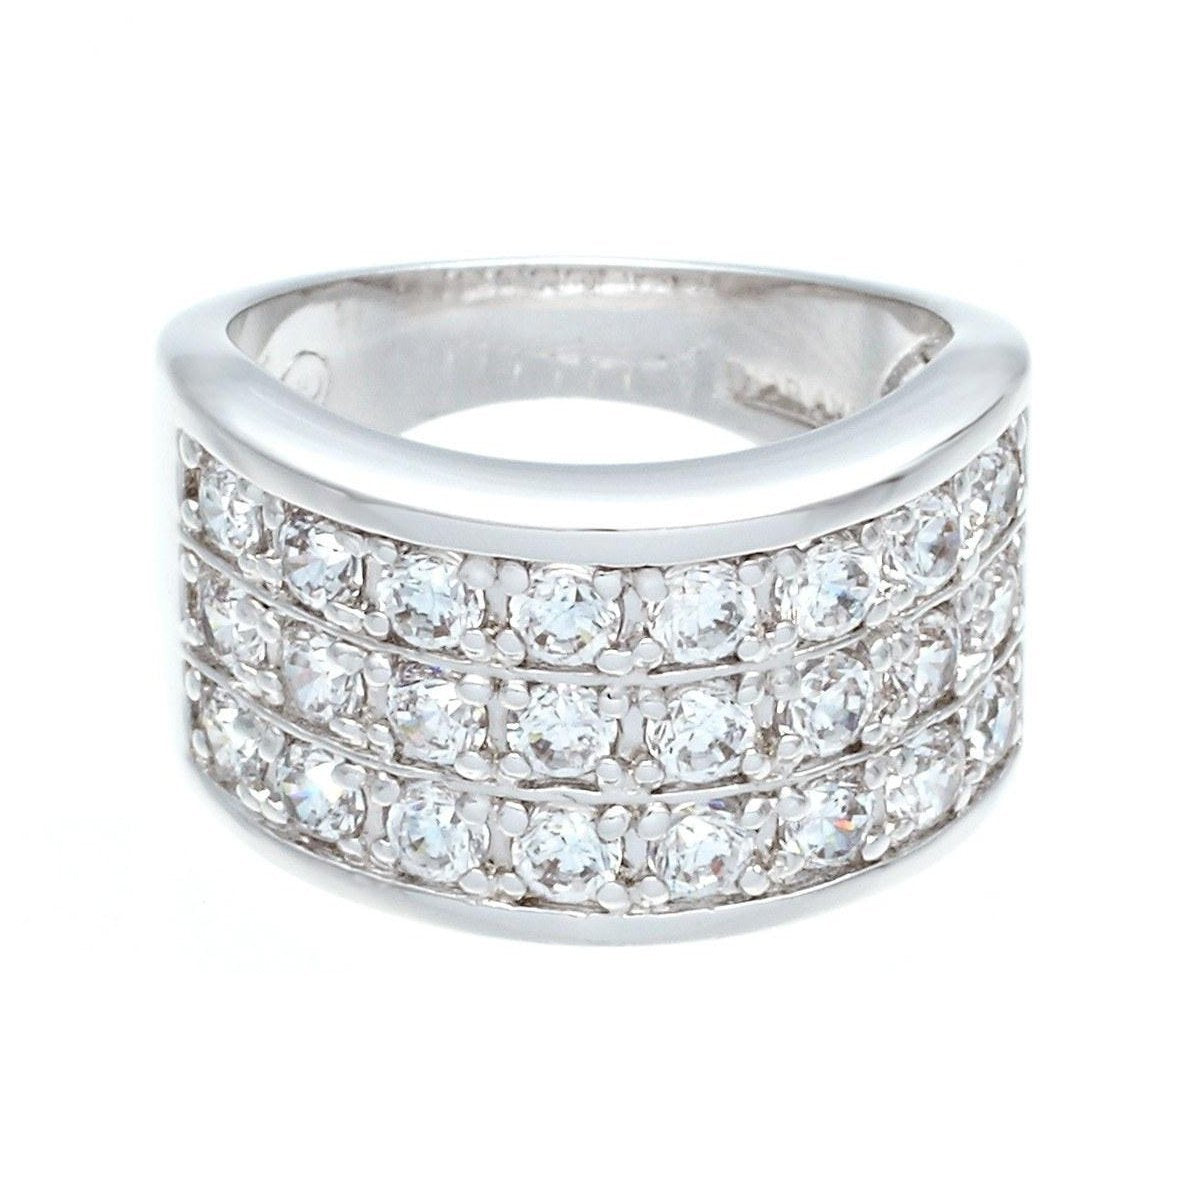 Clear CZ Three Row Ring - 24 Stones, Rhodium Plated Brass, Affordable Glamour Bijou Her